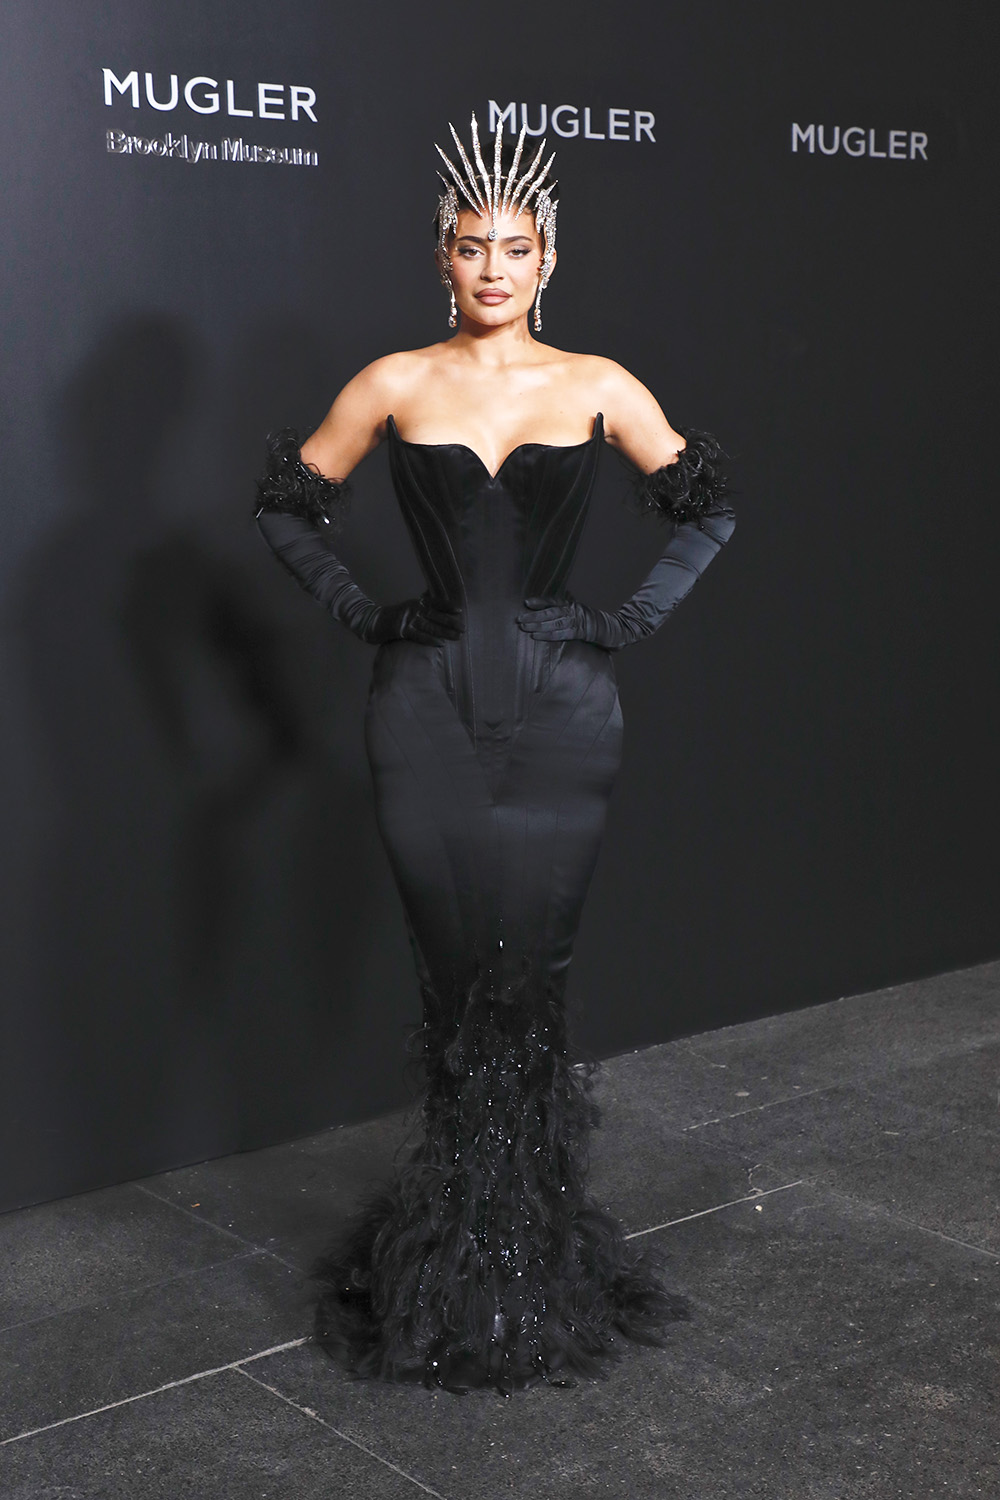 Kylie Jenner at Fashion Week: Photos of Her Best Looks – Hollywood